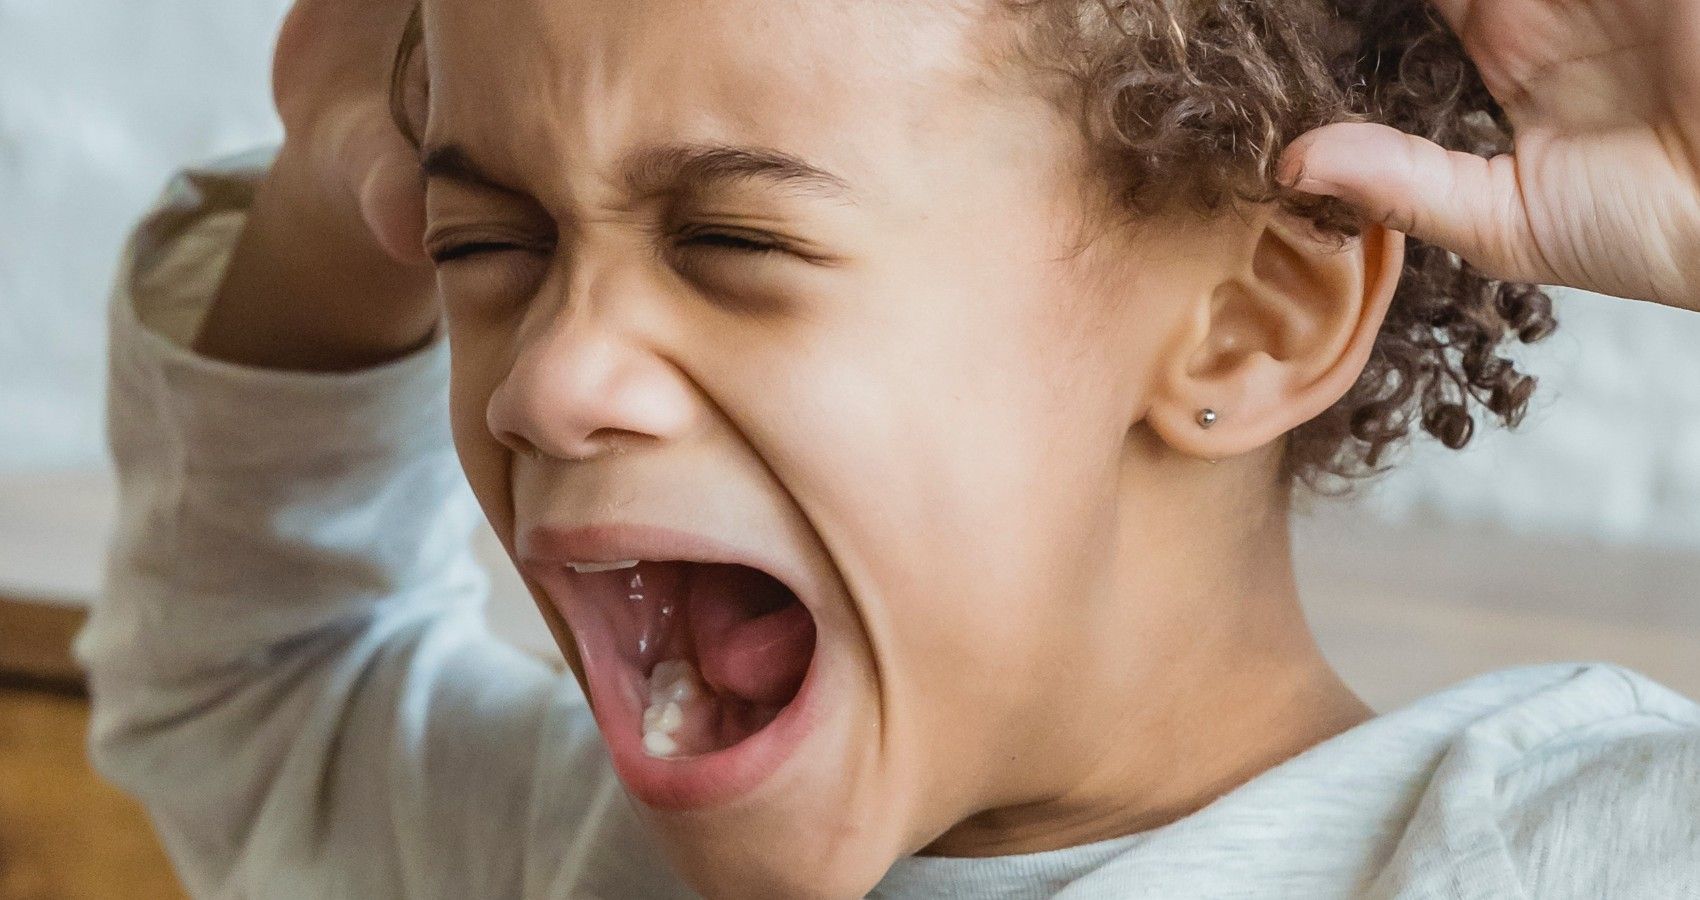 A child screaming with their hands on their ears